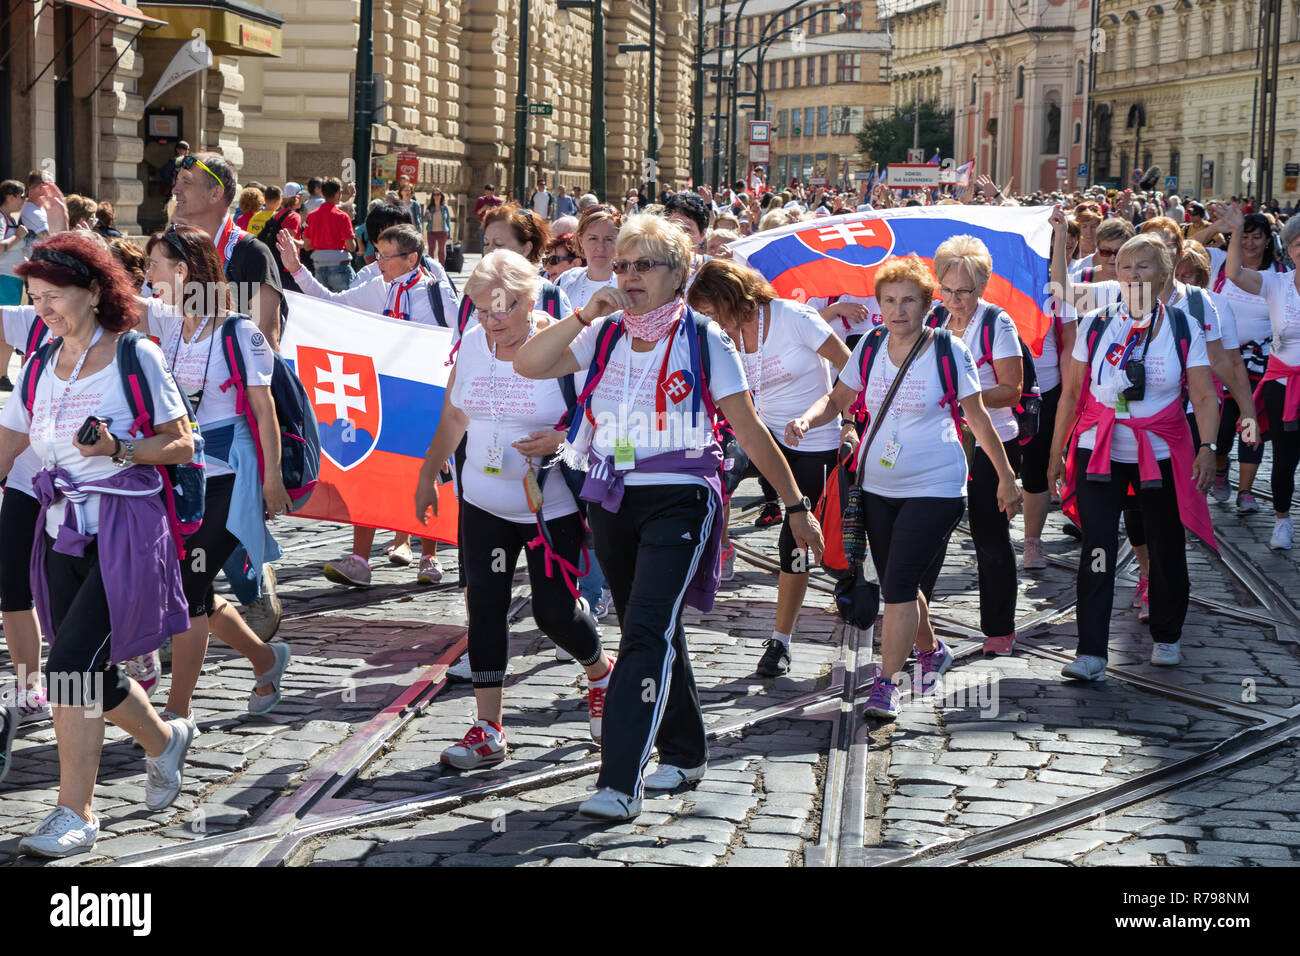 PRAGUE, CZECH REPUBLIC - JULY 1, 2018: Visitors from Slovakia parading at Sokolsky Slet, a once-every-six-years gathering of the Sokol movement - a Cz Stock Photo